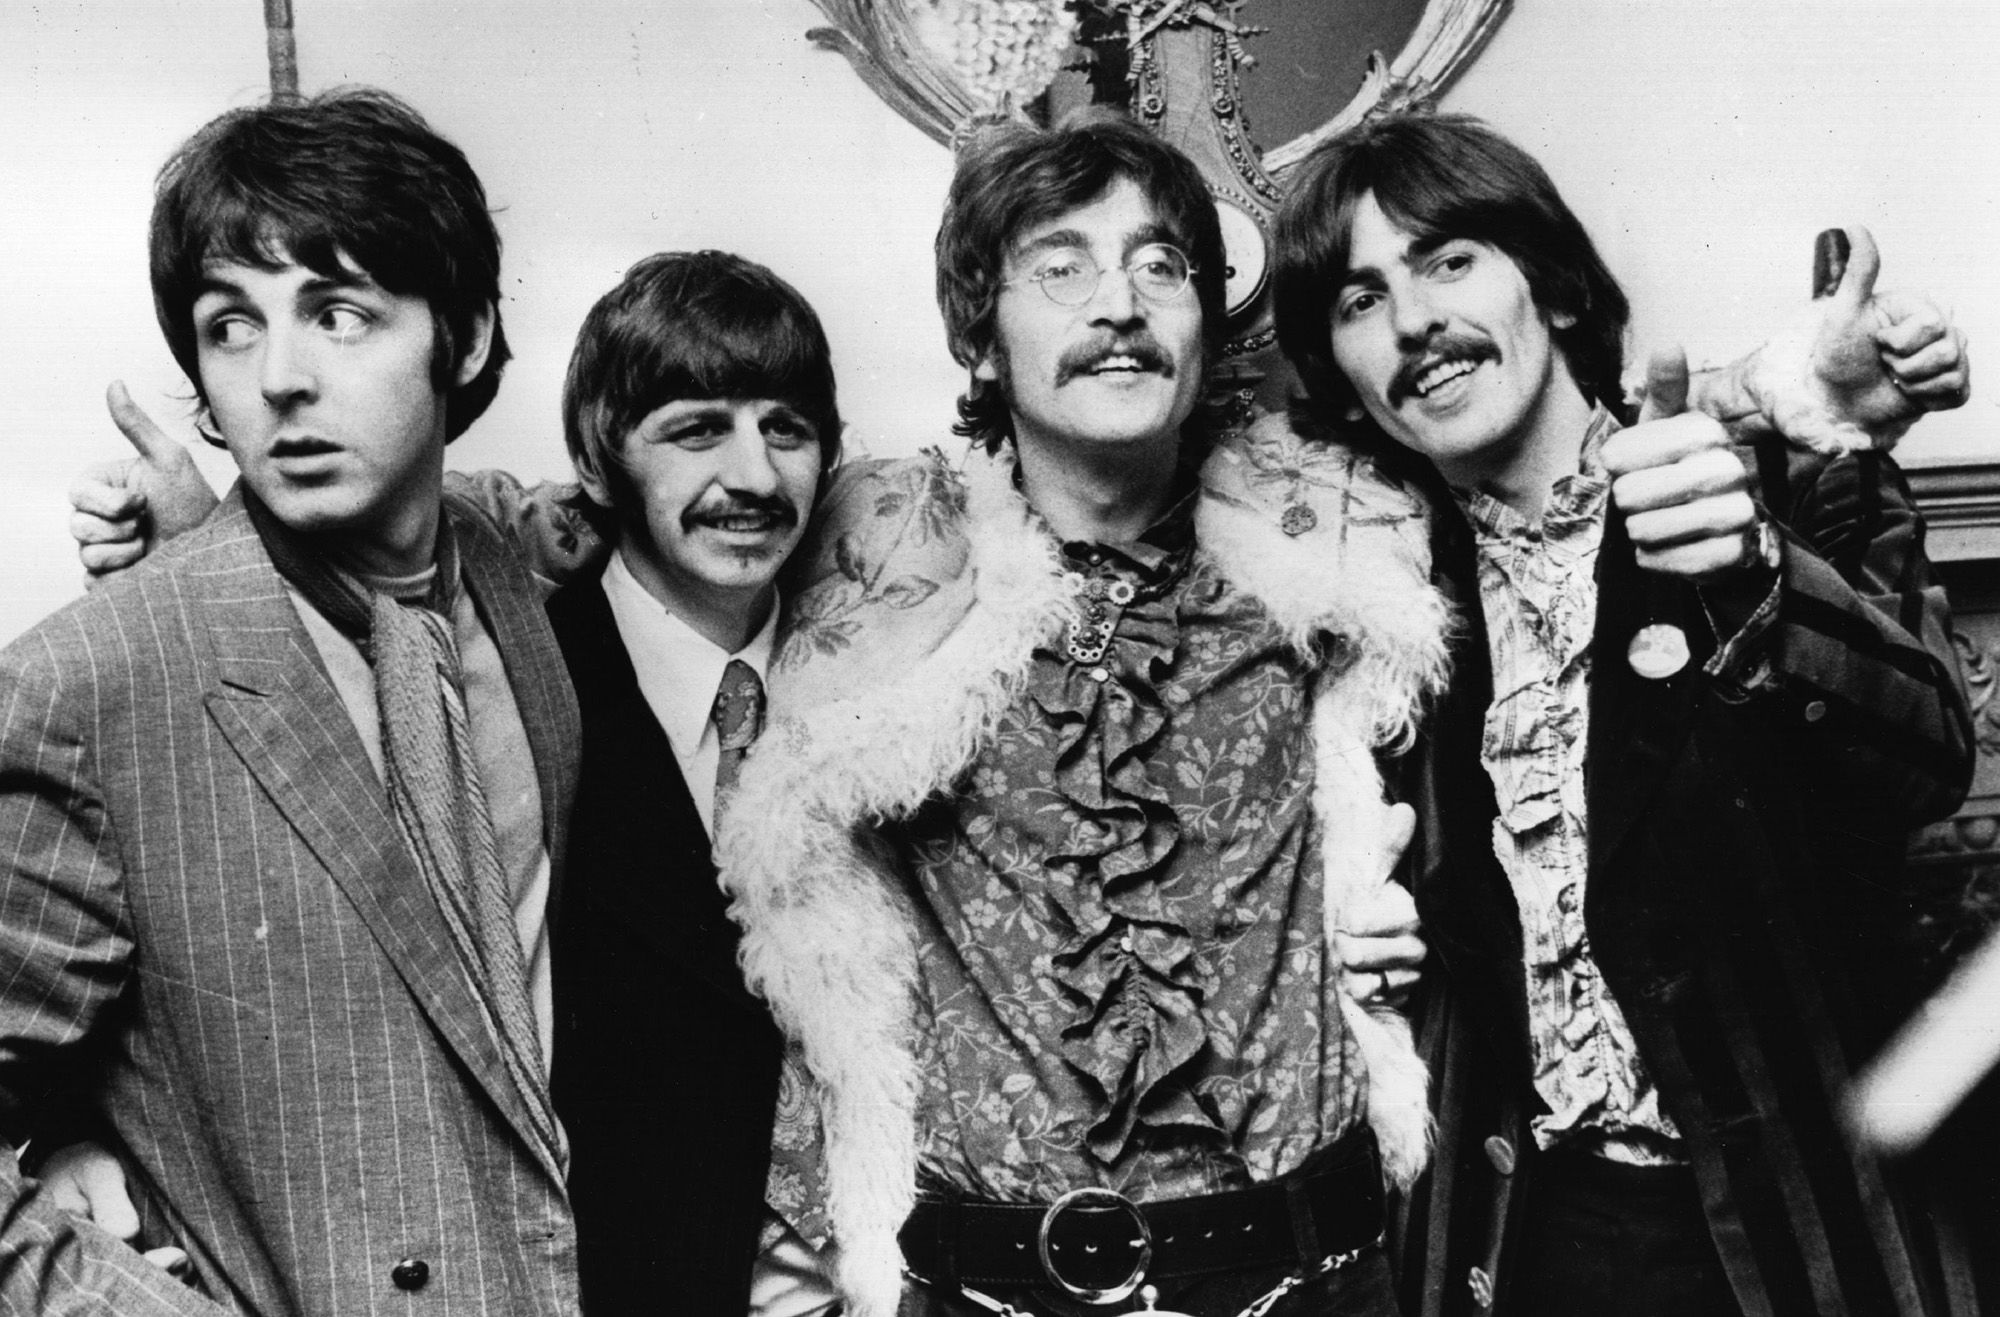 Who plays John Lennon in Yesterday? How Beatles film tackled its